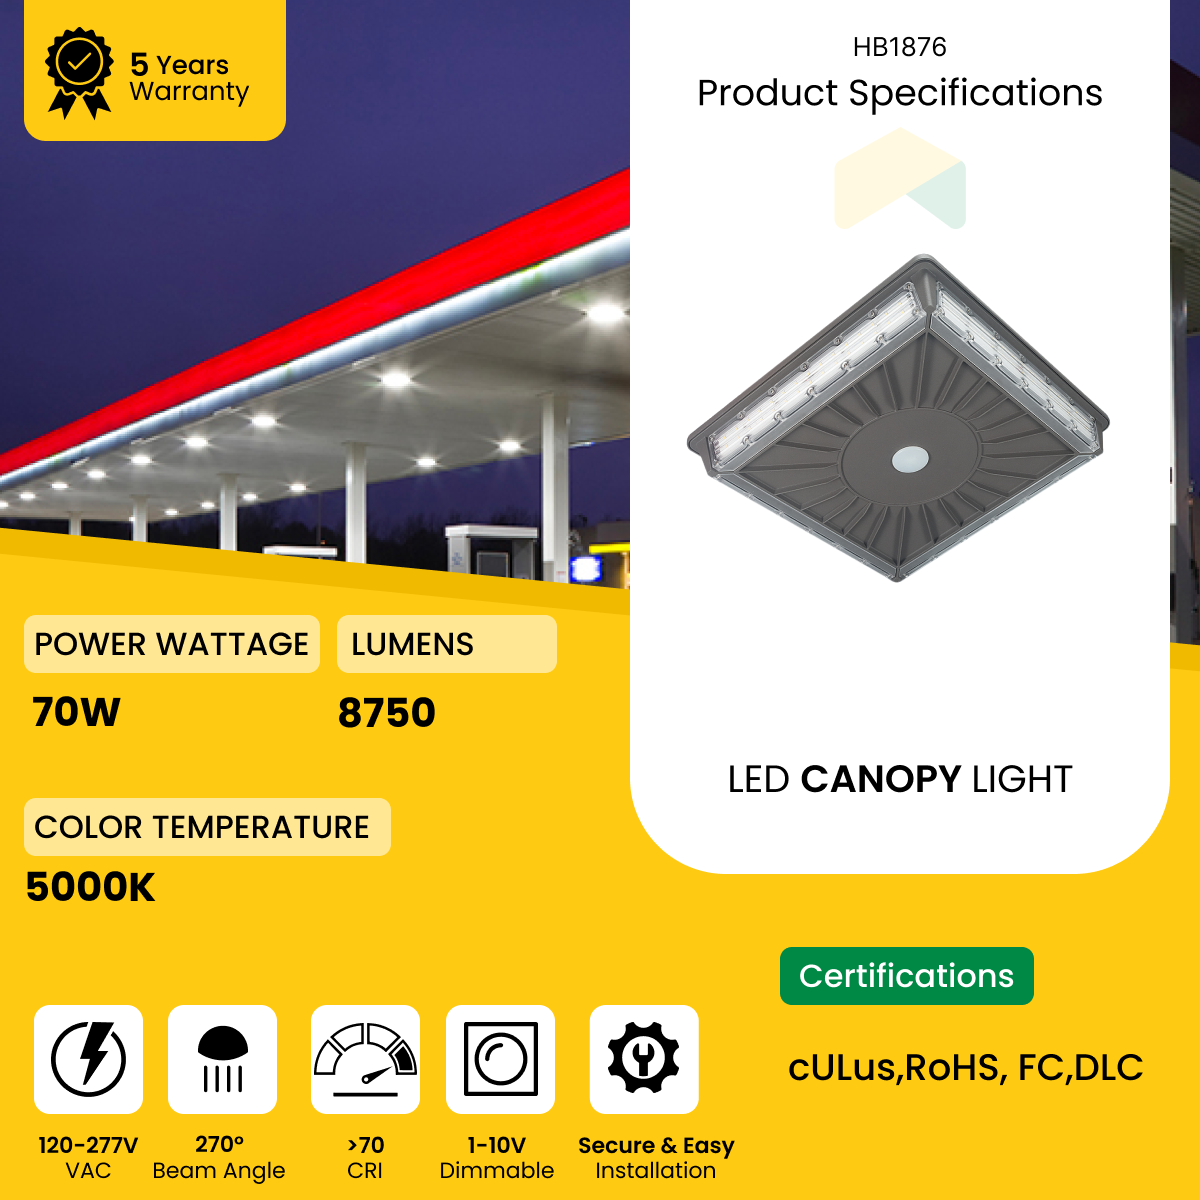 LED Parking Garage Canopy Light - 70W - 5000K, 8750 Lumens CCT AC120-277V, 0-10V Dimmable - IP66 - UL Listed - DLC Premium Listed - 5 Years Warranty